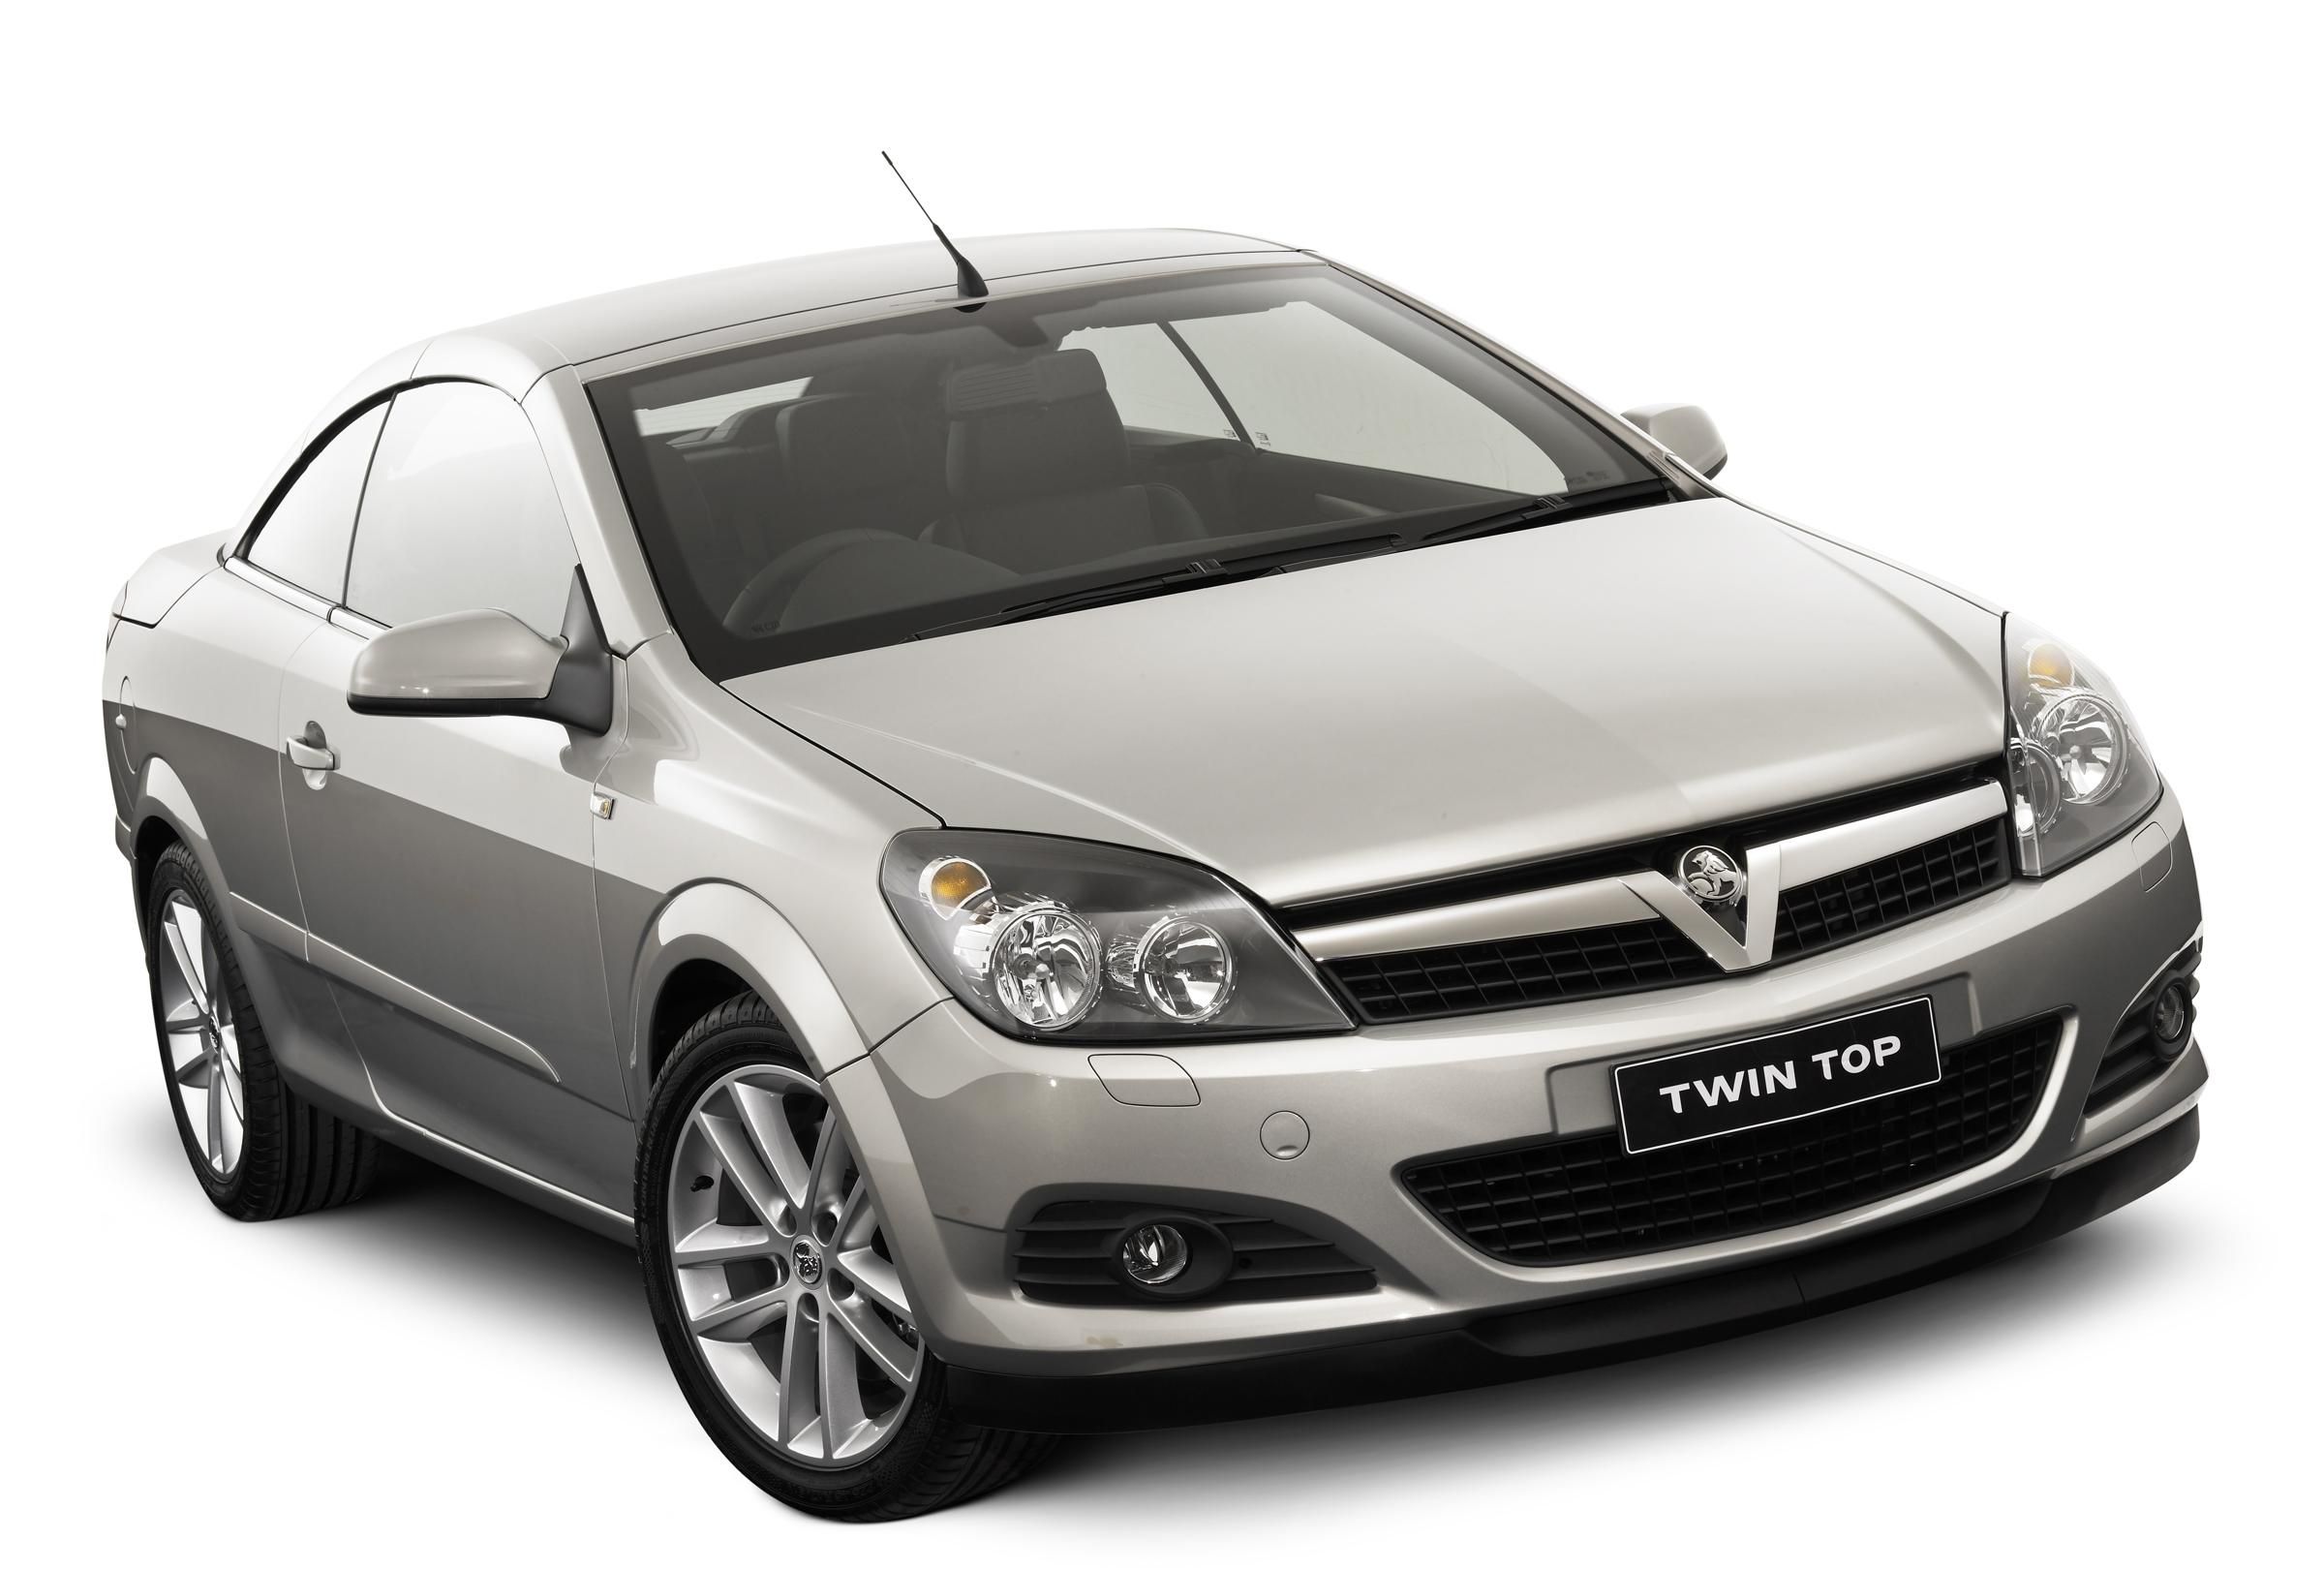 2007 Holden Astra TwinTop